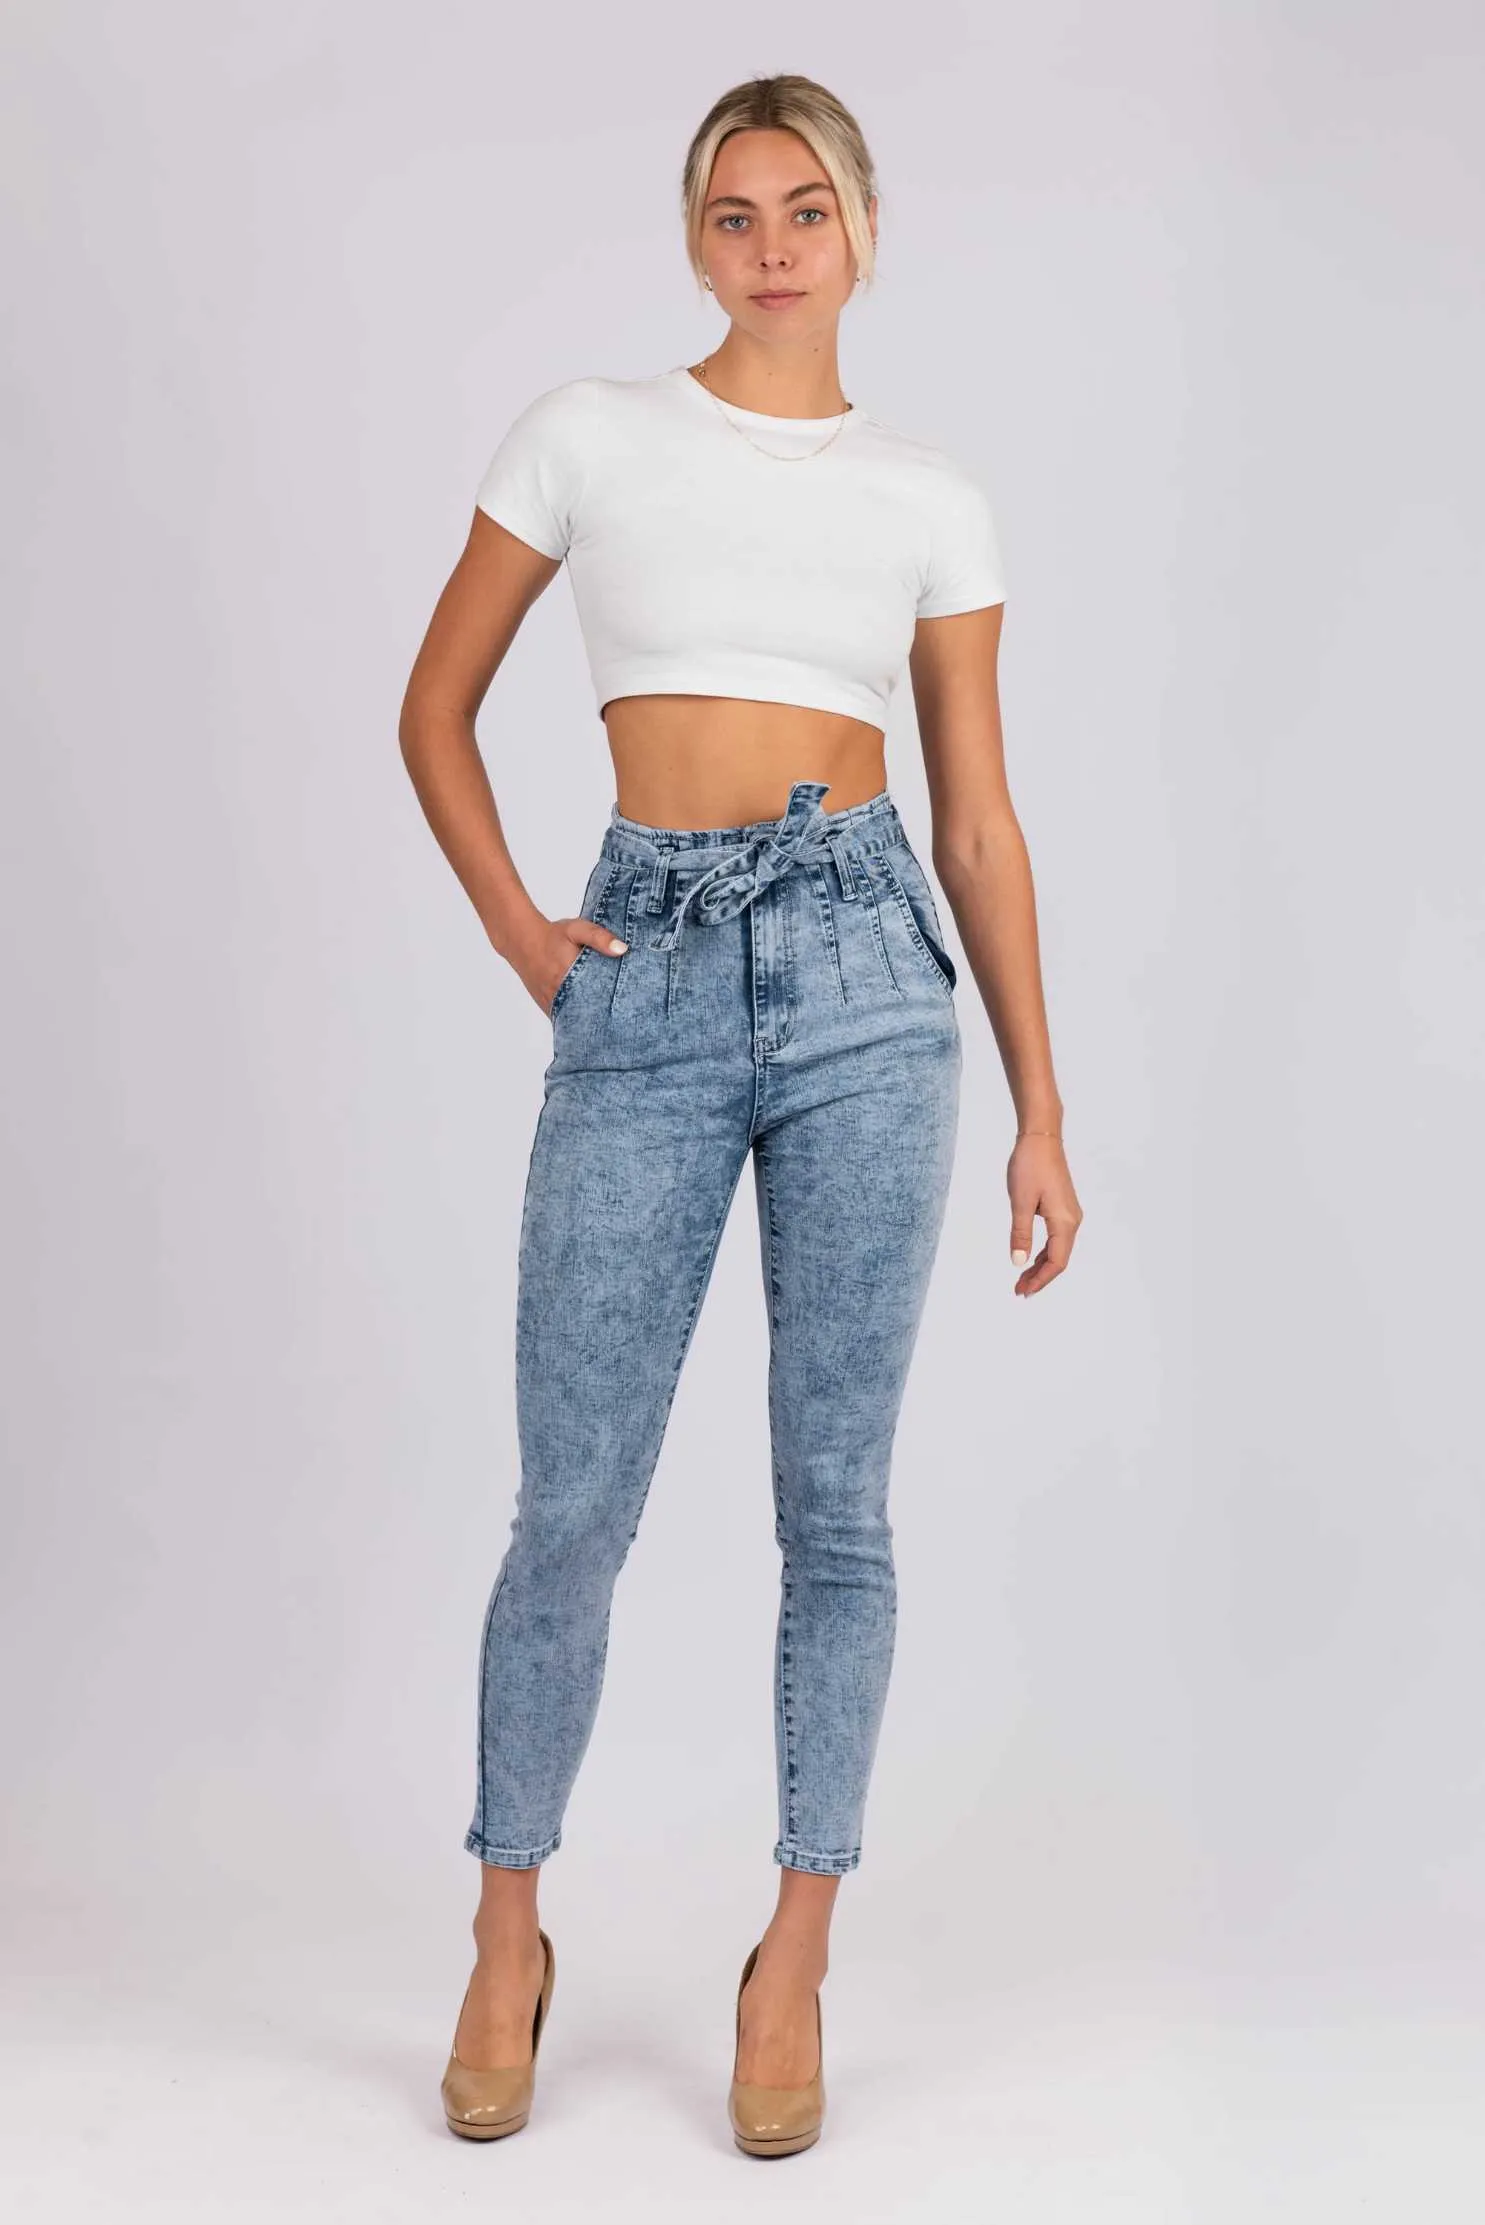 **PREORDER** Murphy Paper Bag Tie Jeans - Acid Wash | Ciao Bella Dresses | The Murphy Acid Wash Jeans are an easy style piece, whether you’re chasing casual or heading out for the night. The front feature darts give it additional character.